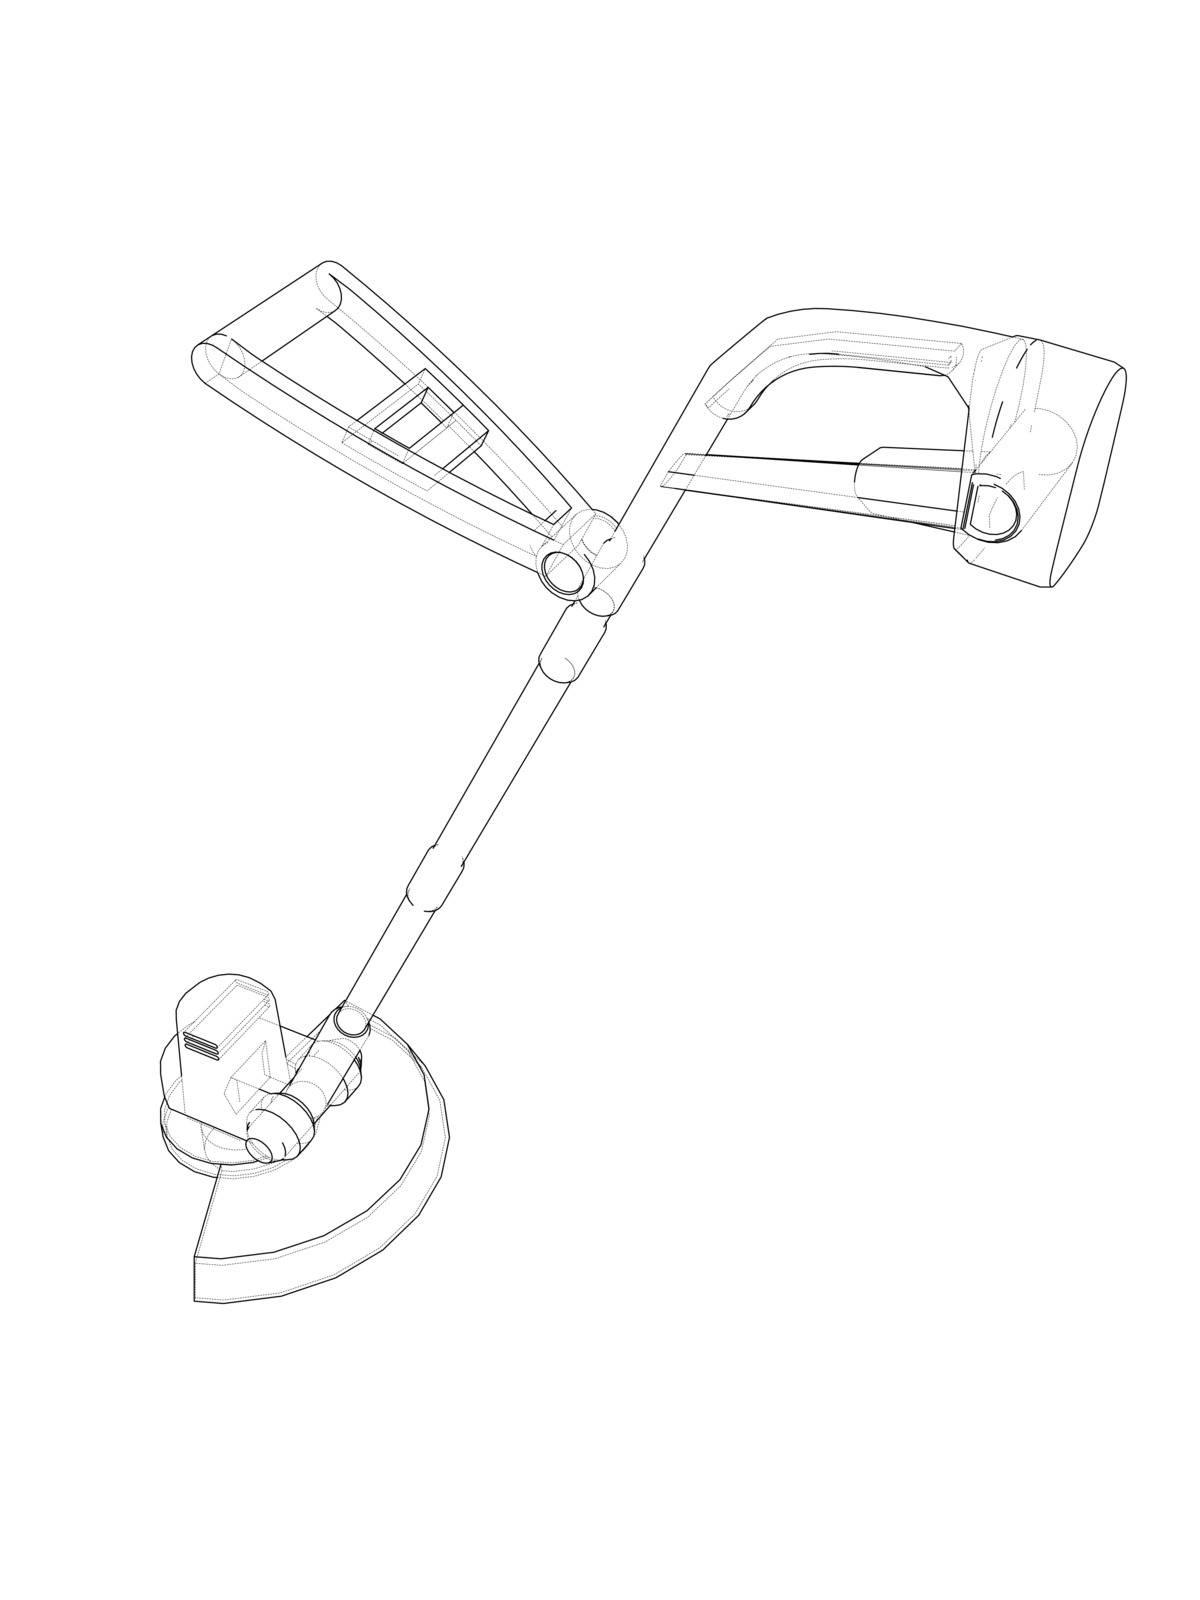 Outline trimmer grass cutter. Vector by cherezoff